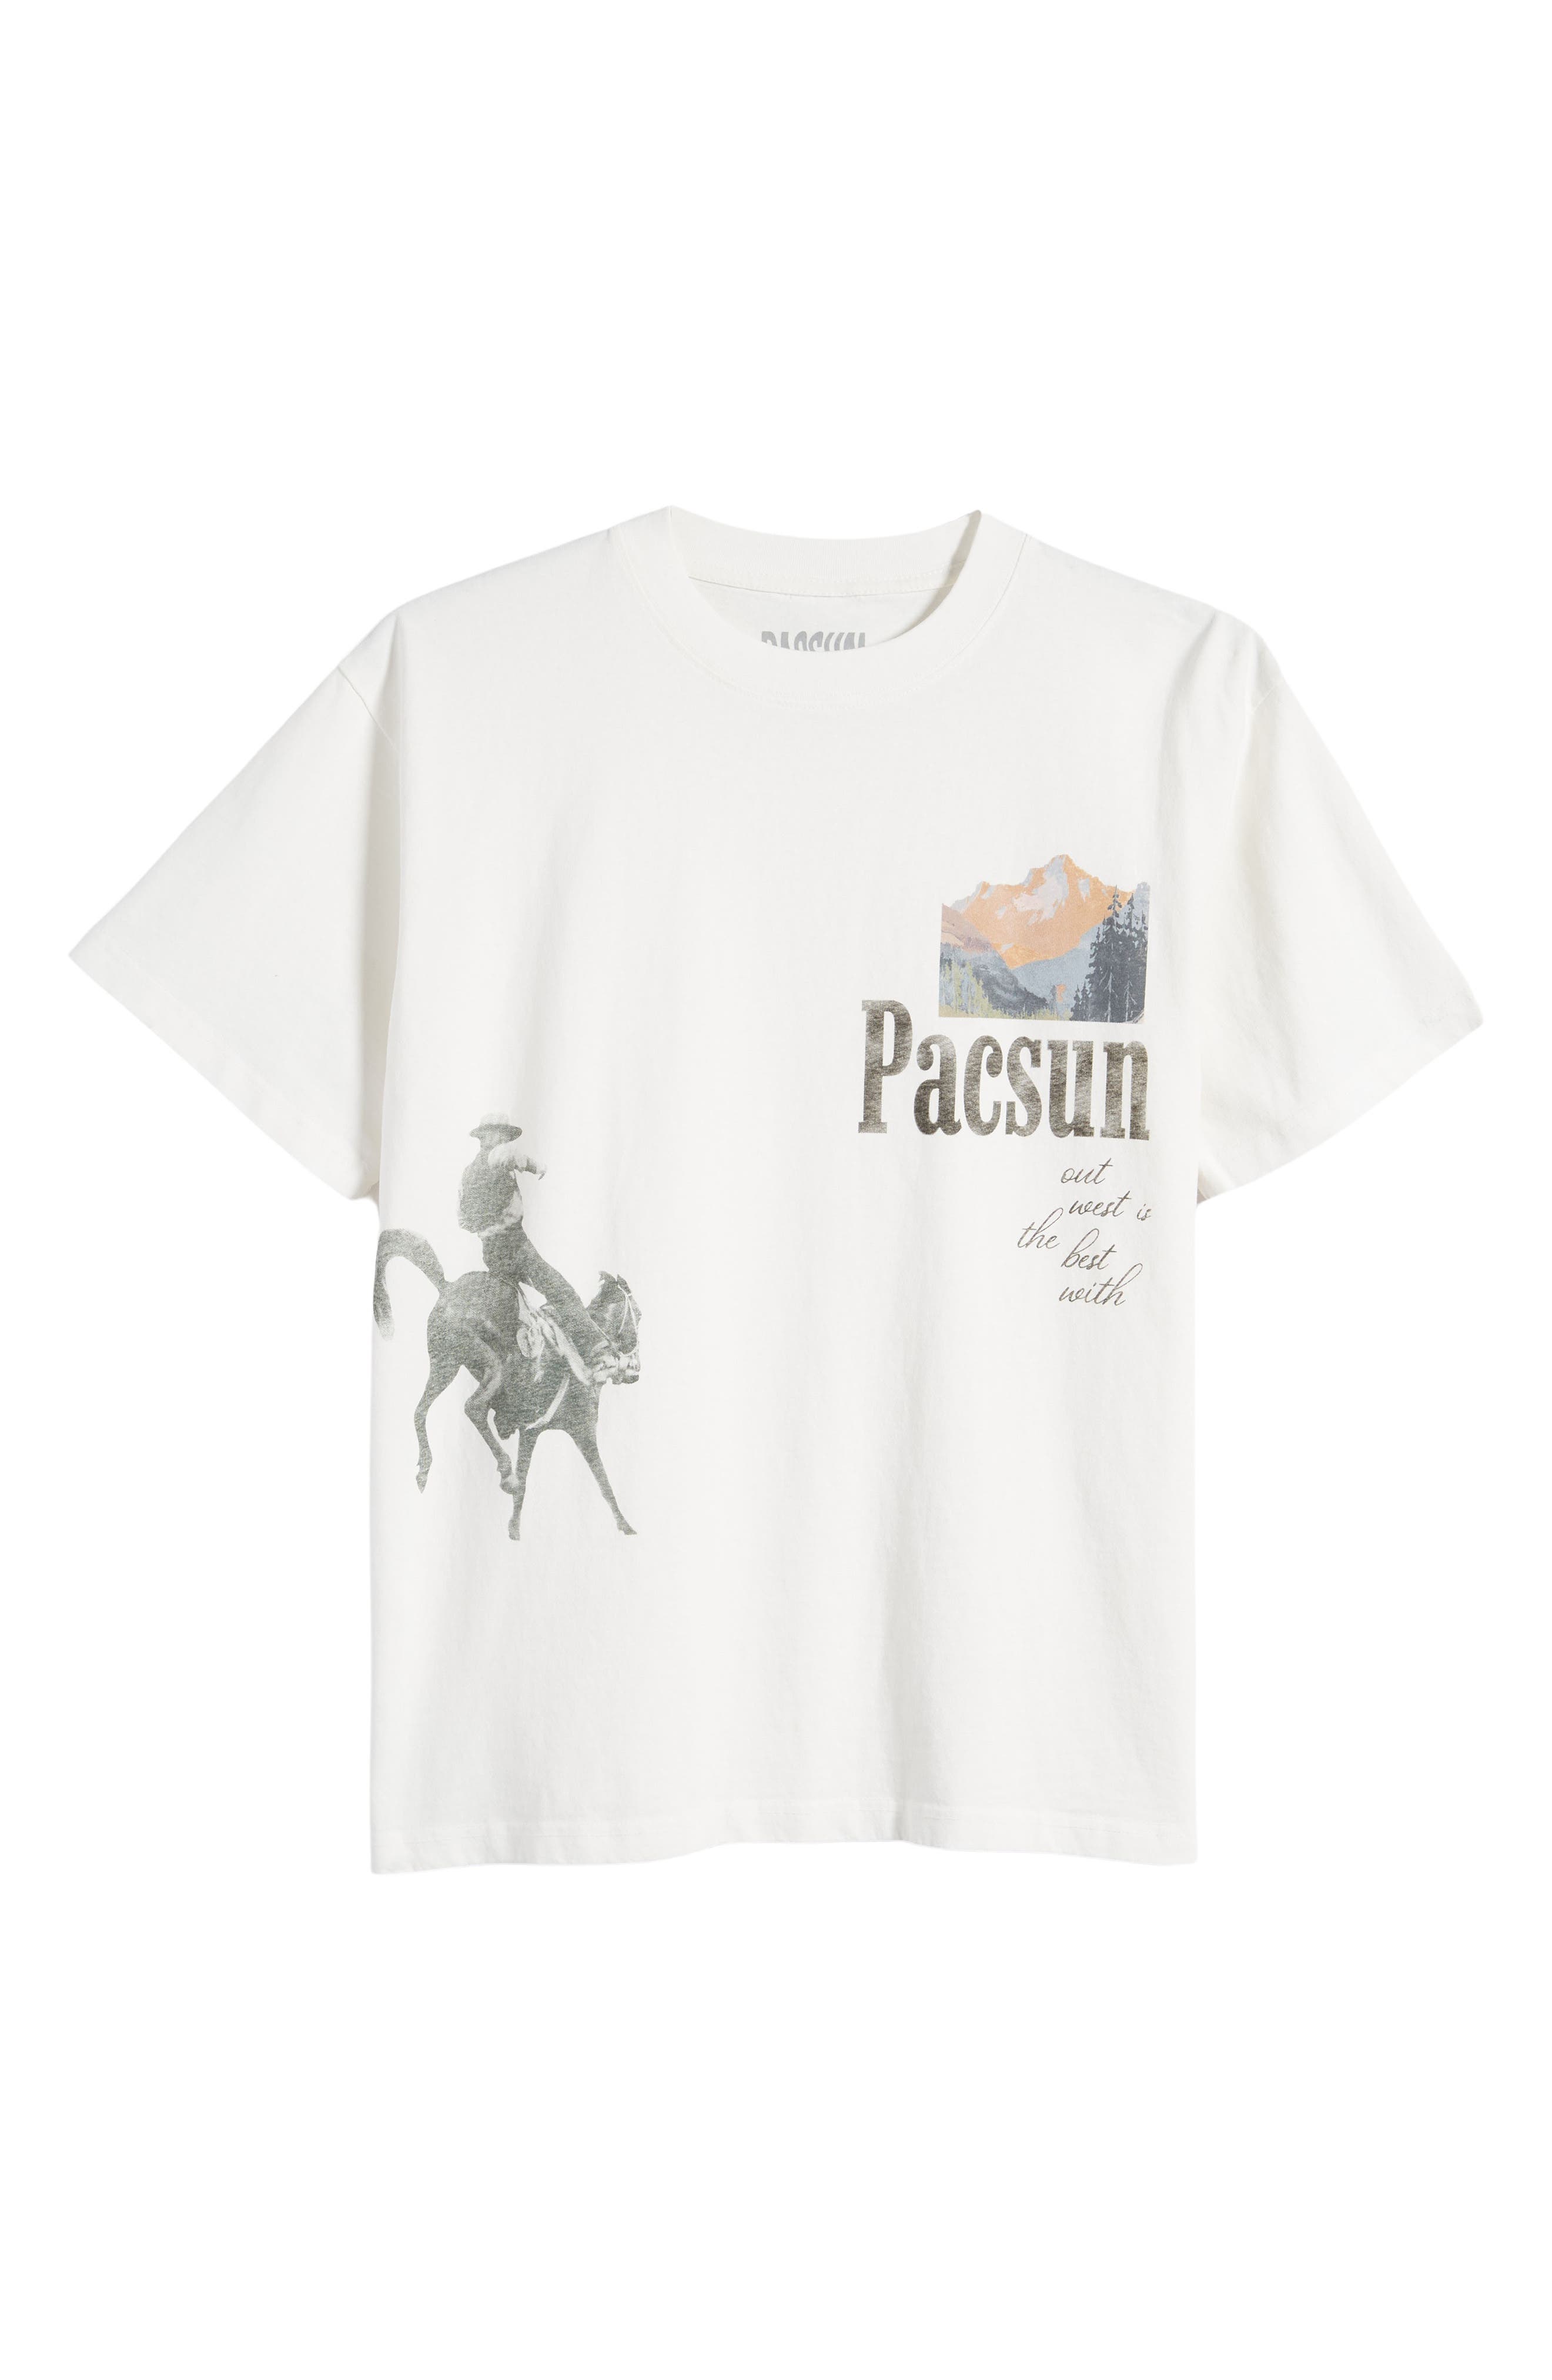 Pacsun Know Your Worth T-Shirt in Tan - Size Medium